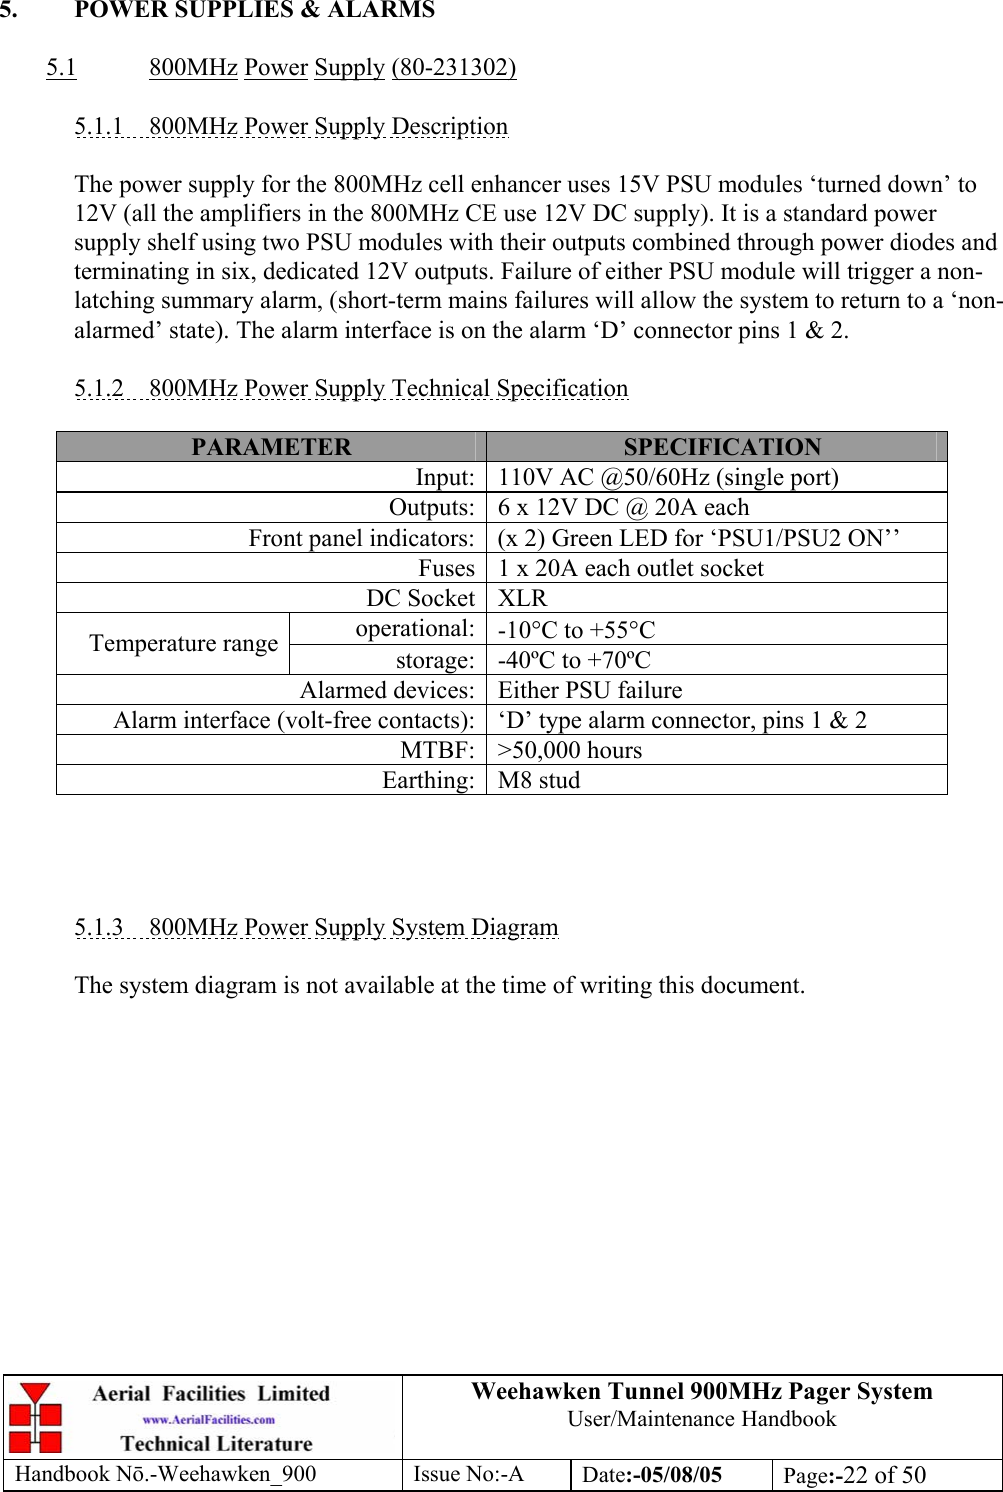 Weehawken Tunnel 900MHz Pager System User/Maintenance Handbook Handbook N.-Weehawken_900 Issue No:-A Date:-05/08/05  Page:-22 of 50   5.  POWER SUPPLIES &amp; ALARMS  5.1 800MHz Power Supply (80-231302)  5.1.1  800MHz Power Supply Description  The power supply for the 800MHz cell enhancer uses 15V PSU modules ‘turned down’ to 12V (all the amplifiers in the 800MHz CE use 12V DC supply). It is a standard power supply shelf using two PSU modules with their outputs combined through power diodes and terminating in six, dedicated 12V outputs. Failure of either PSU module will trigger a non-latching summary alarm, (short-term mains failures will allow the system to return to a ‘non-alarmed’ state). The alarm interface is on the alarm ‘D’ connector pins 1 &amp; 2.  5.1.2  800MHz Power Supply Technical Specification  PARAMETER  SPECIFICATION Input: 110V AC @50/60Hz (single port) Outputs: 6 x 12V DC @ 20A each Front panel indicators: (x 2) Green LED for ‘PSU1/PSU2 ON’’ Fuses 1 x 20A each outlet socket DC Socket XLR operational: -10°C to +55°C Temperature range  storage: -40ºC to +70ºC Alarmed devices: Either PSU failure Alarm interface (volt-free contacts): ‘D’ type alarm connector, pins 1 &amp; 2 MTBF: &gt;50,000 hours Earthing: M8 stud     5.1.3  800MHz Power Supply System Diagram  The system diagram is not available at the time of writing this document. 